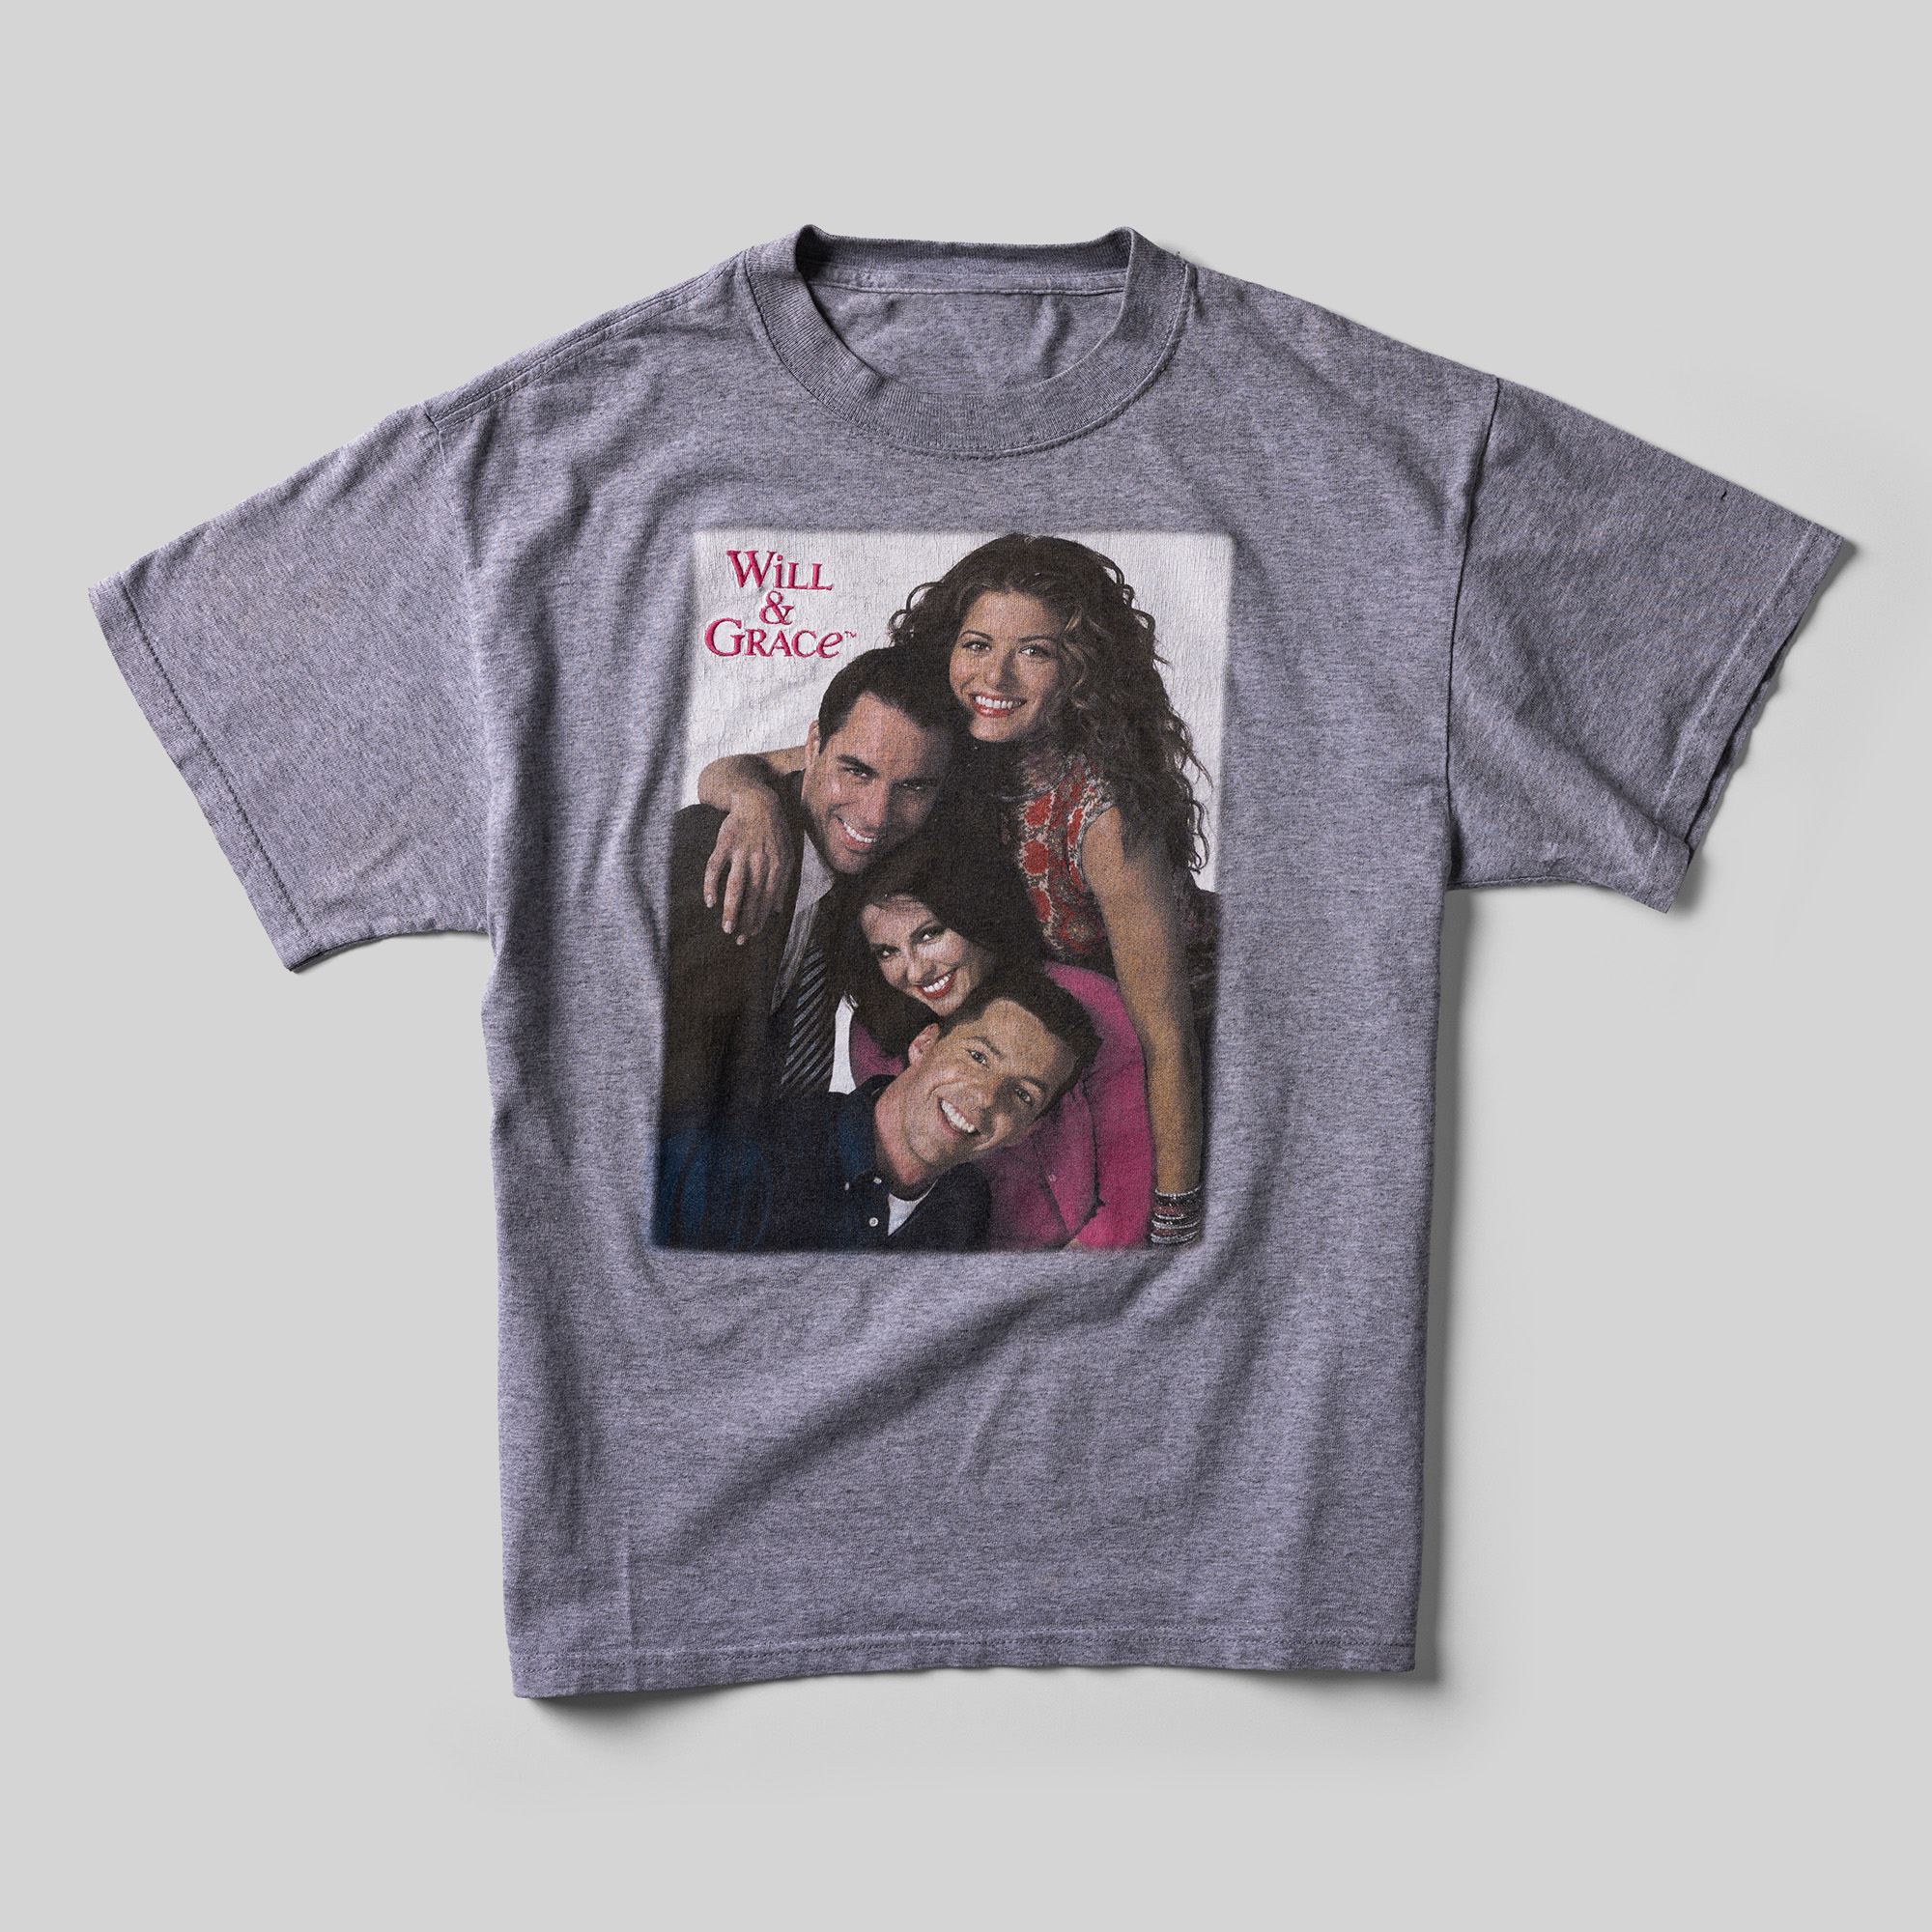 A gray t-shirt with a color photo of the main cast of Will & Grace with "Will & Grace" printed in the corner.